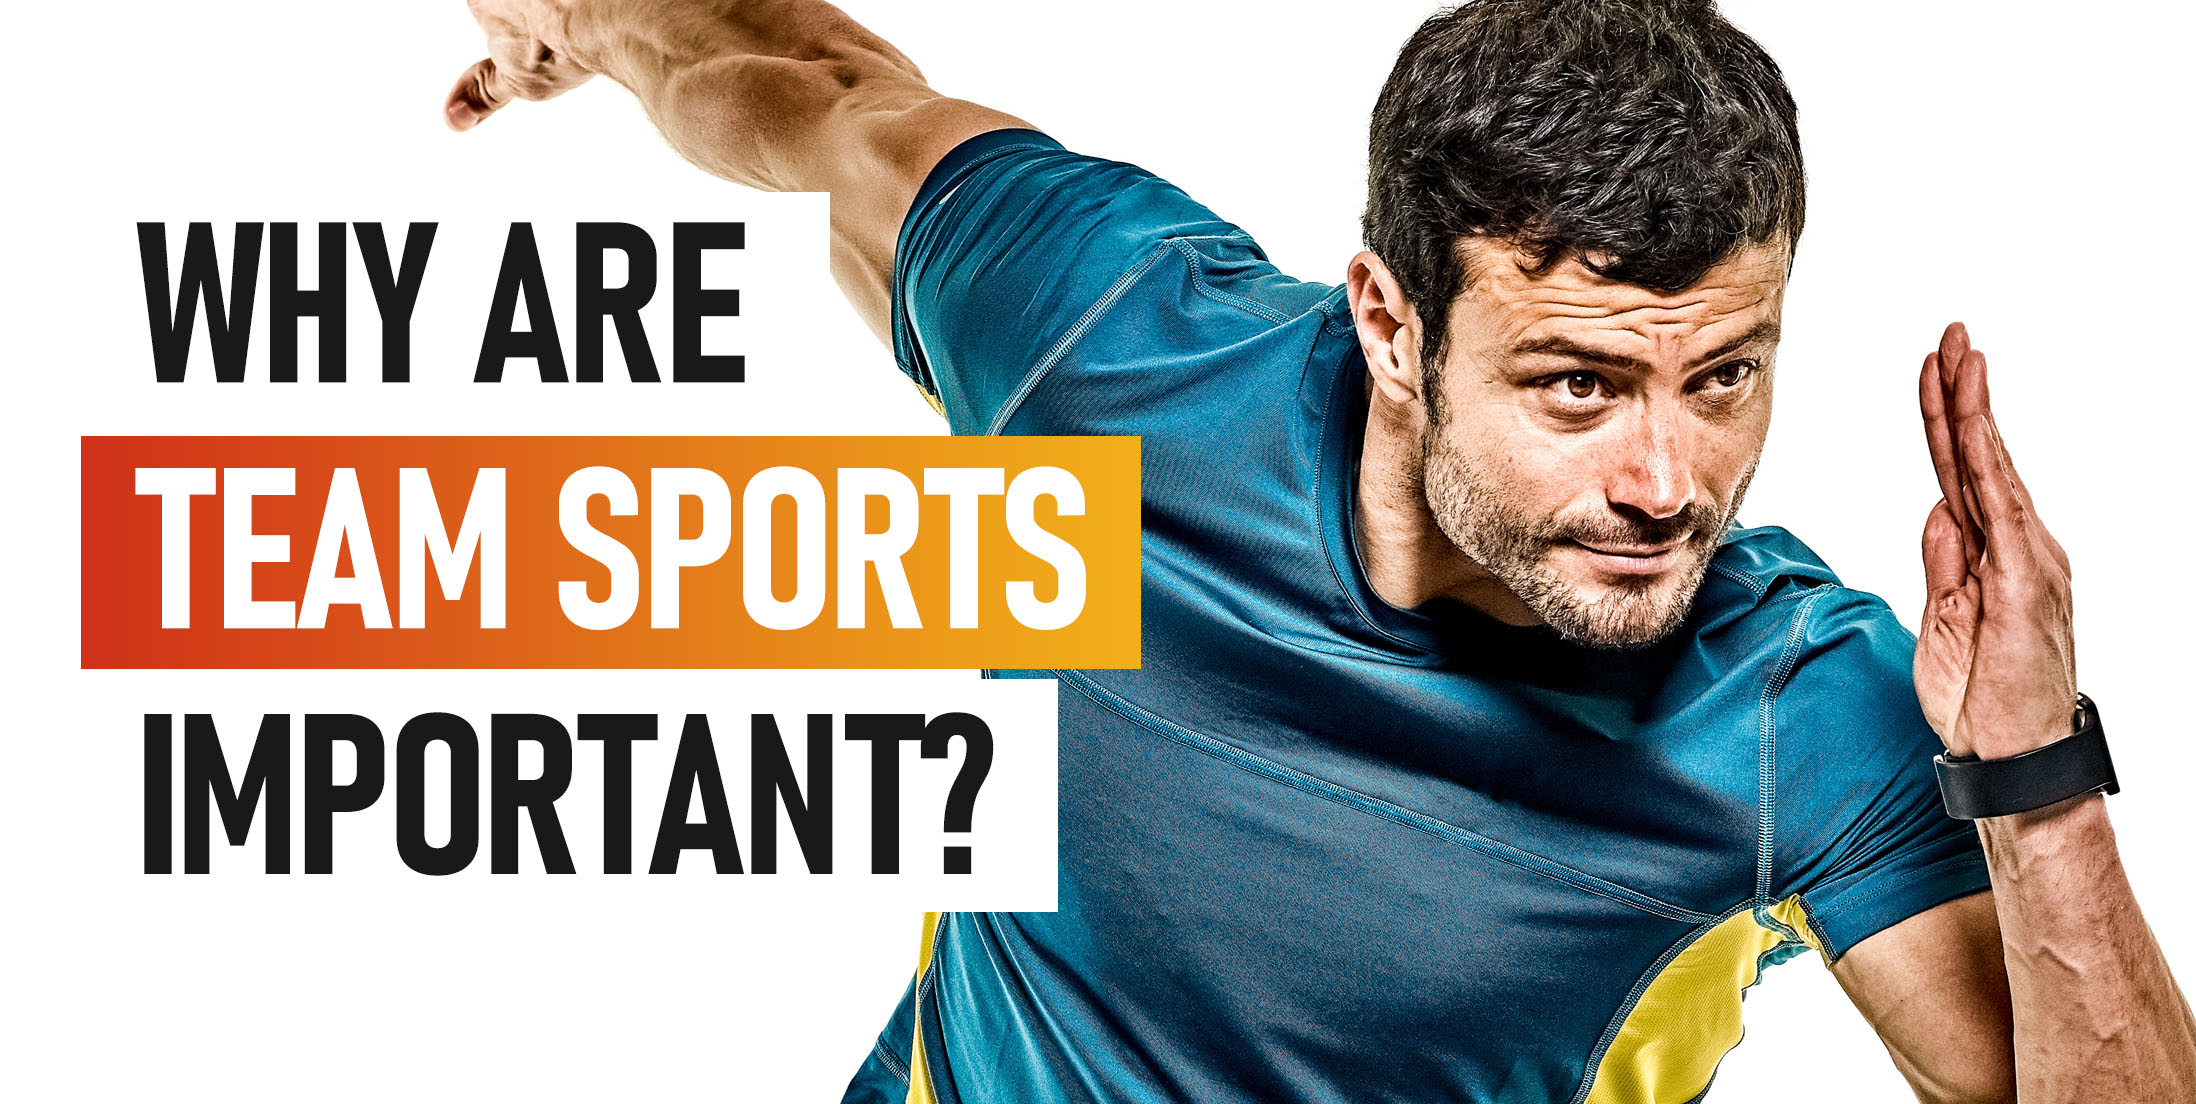 Why Are Team Sports So Important?